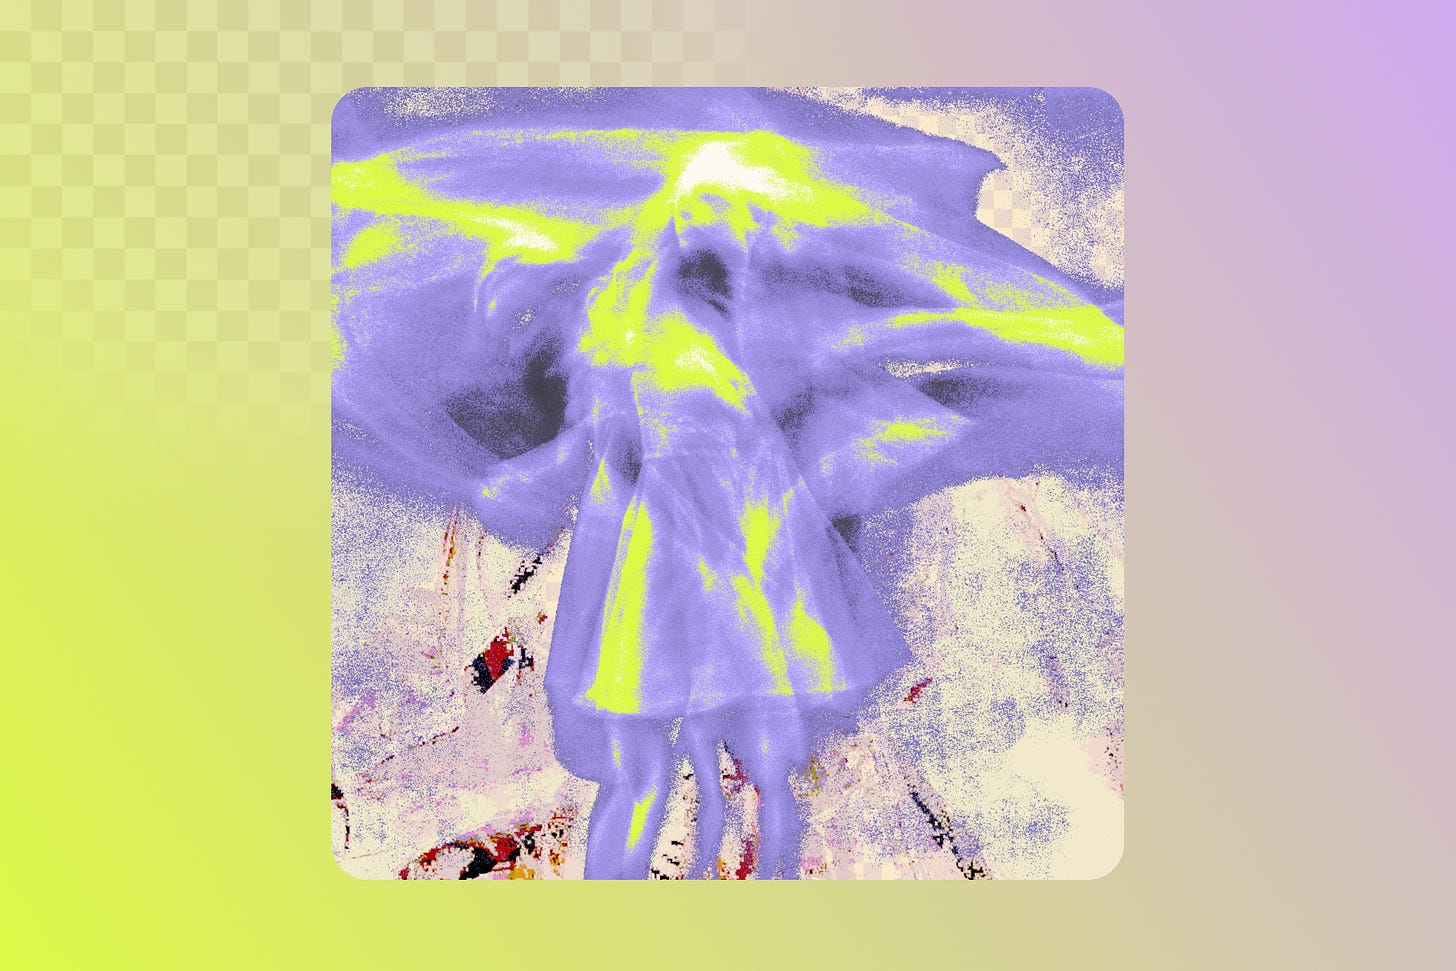 Image of an abstract, swooshing painting in mostly purple and neon green against a faded gradient background. Some work in progress design elements reveal themselves within the image